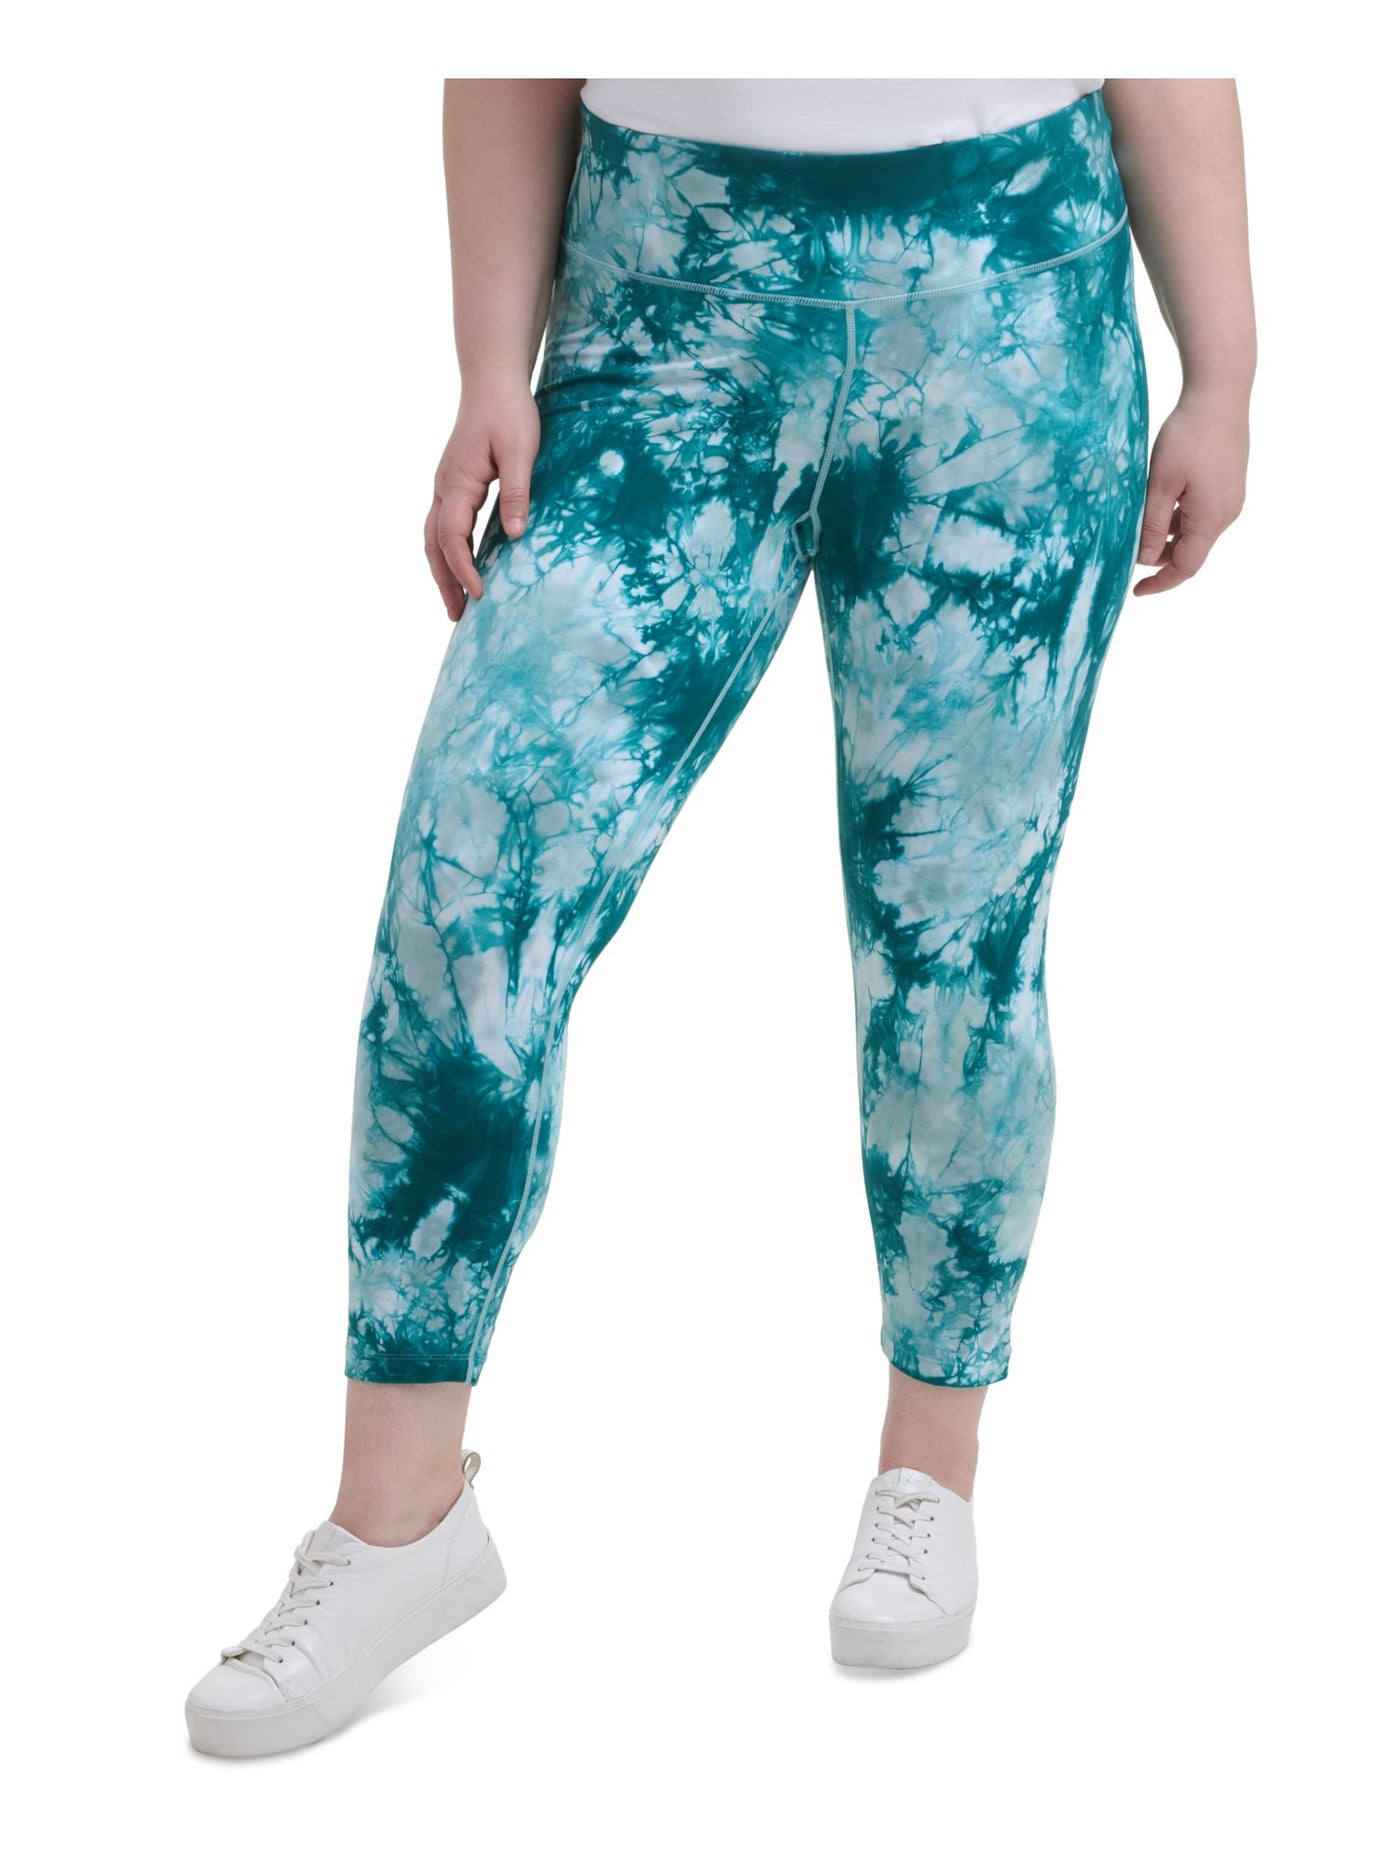 CALVIN KLEIN PERFORMANCE Womens Turquoise Stretch Pocketed Pull-on Style Tie Dye Active Wear Skinny Leggings Plus 1X